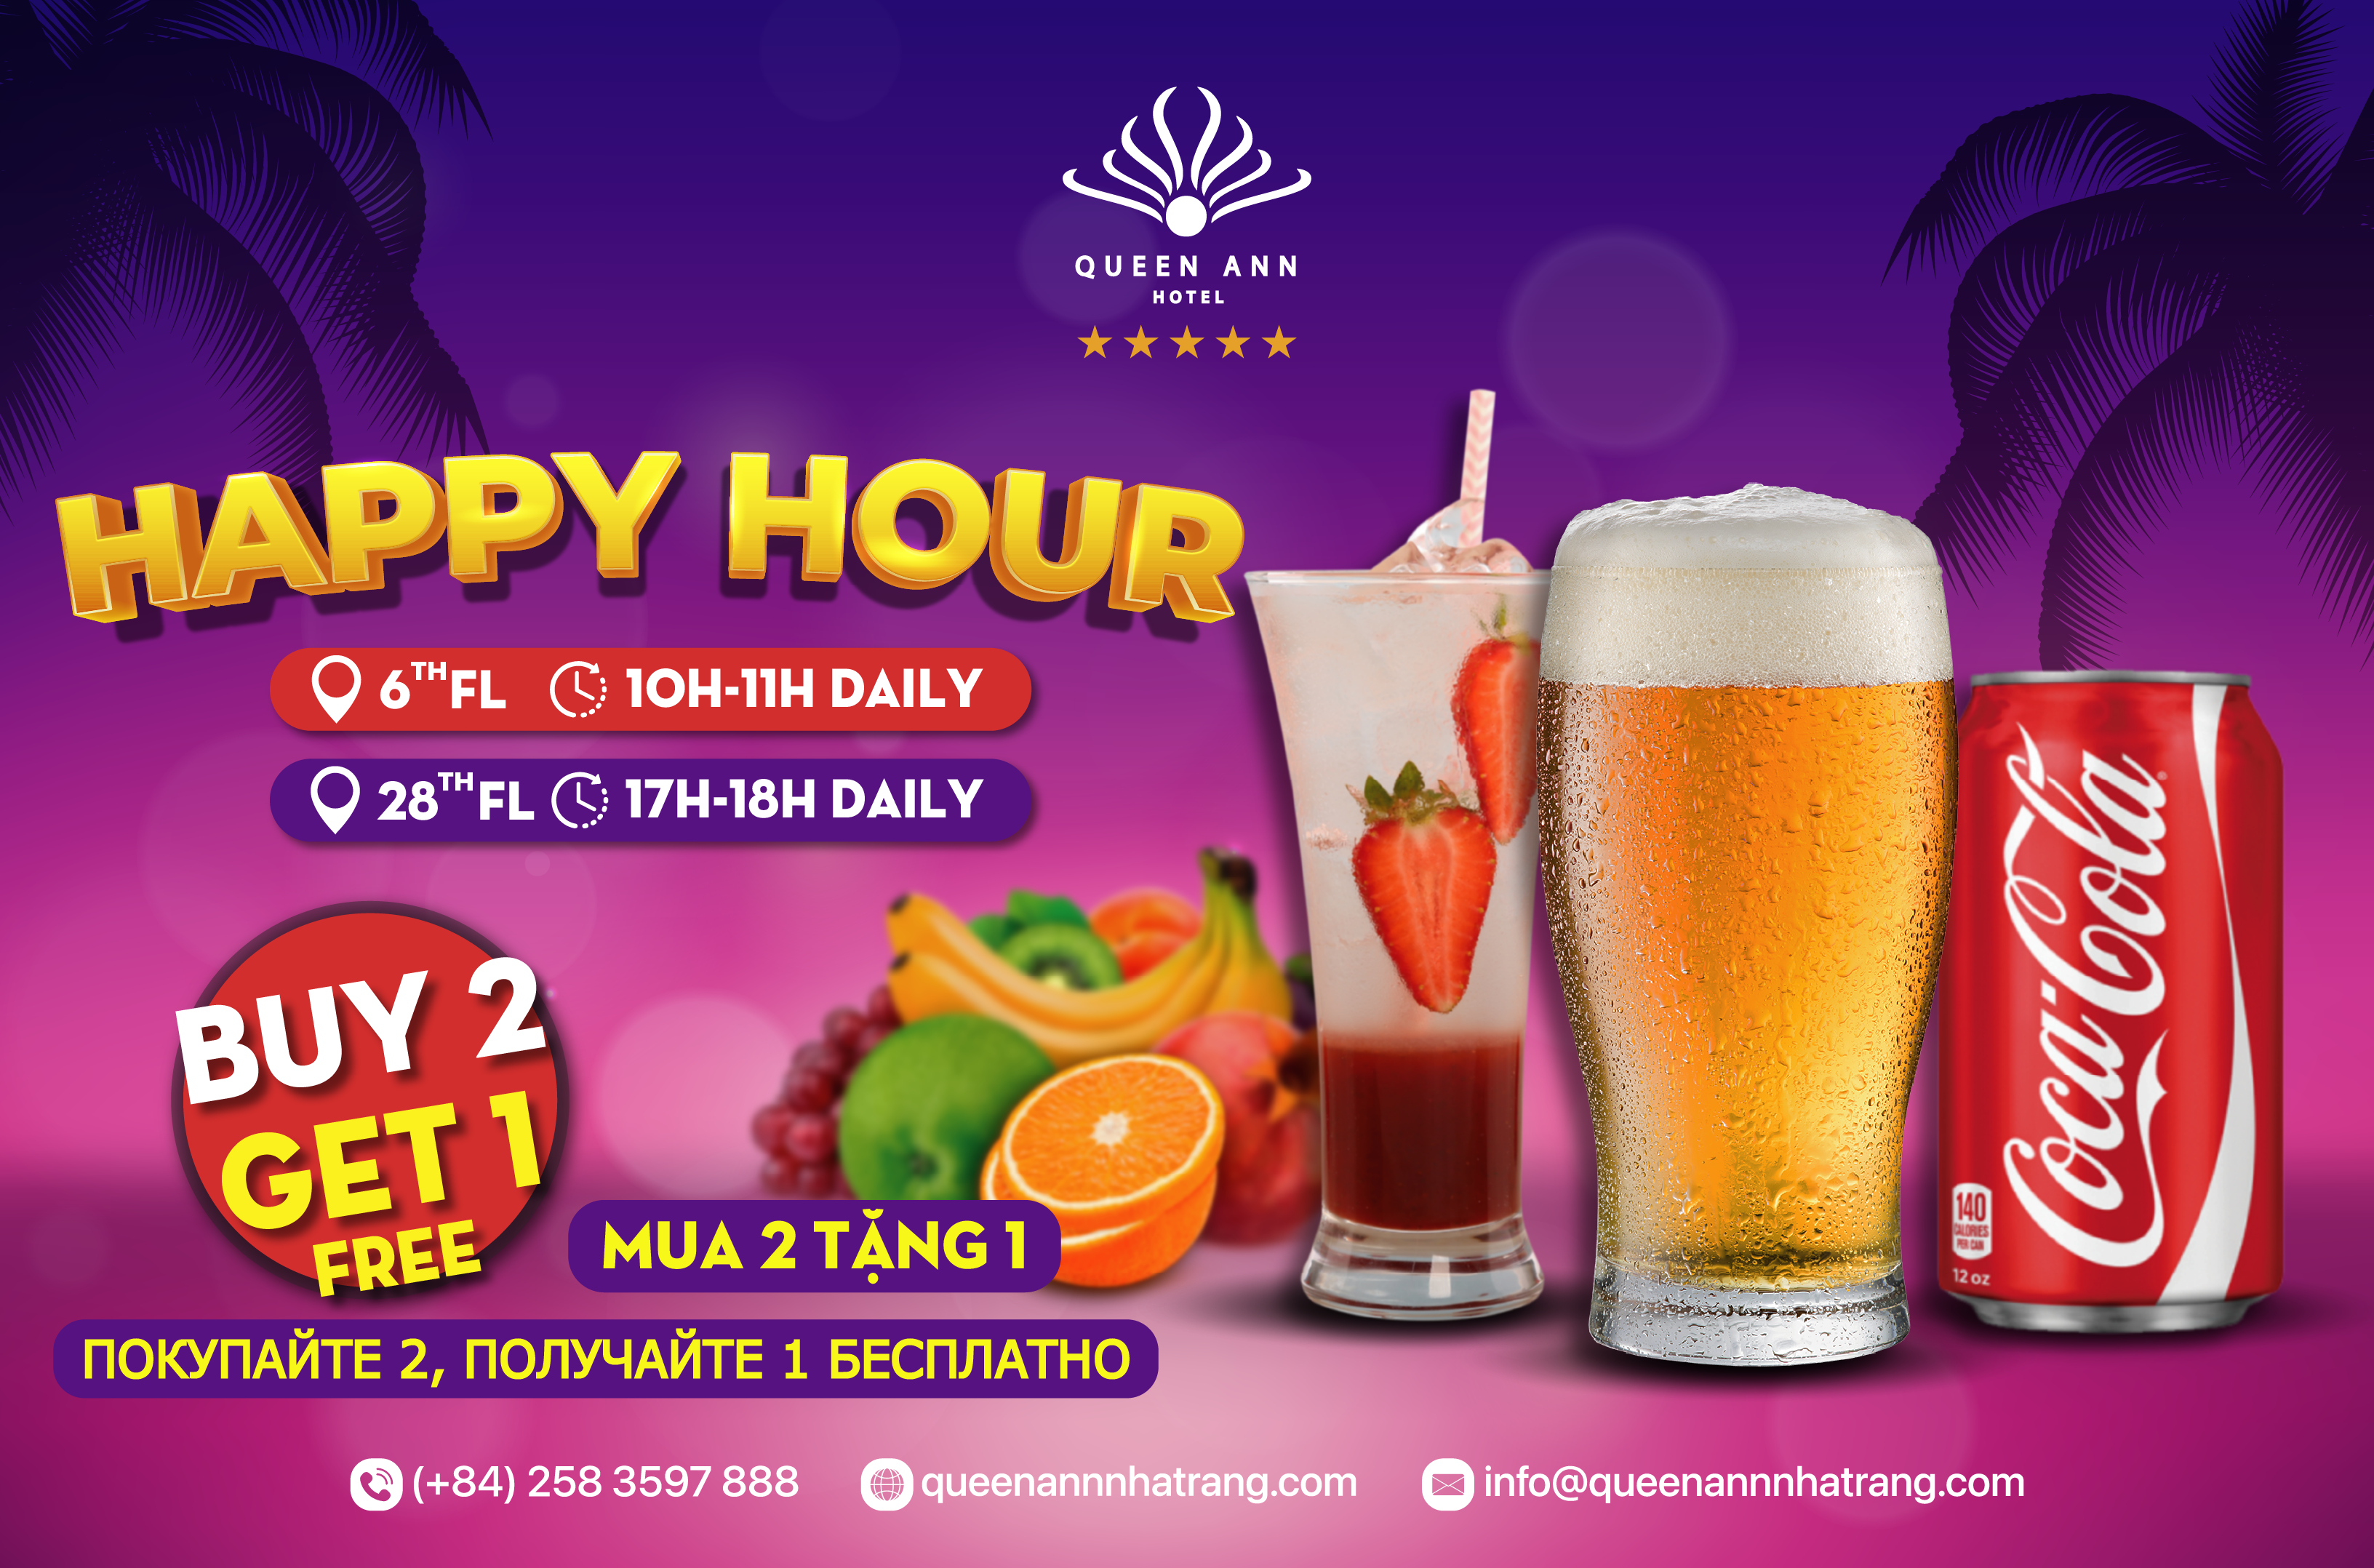 Happy Hour - Thousands of offer, Golden hours of experience